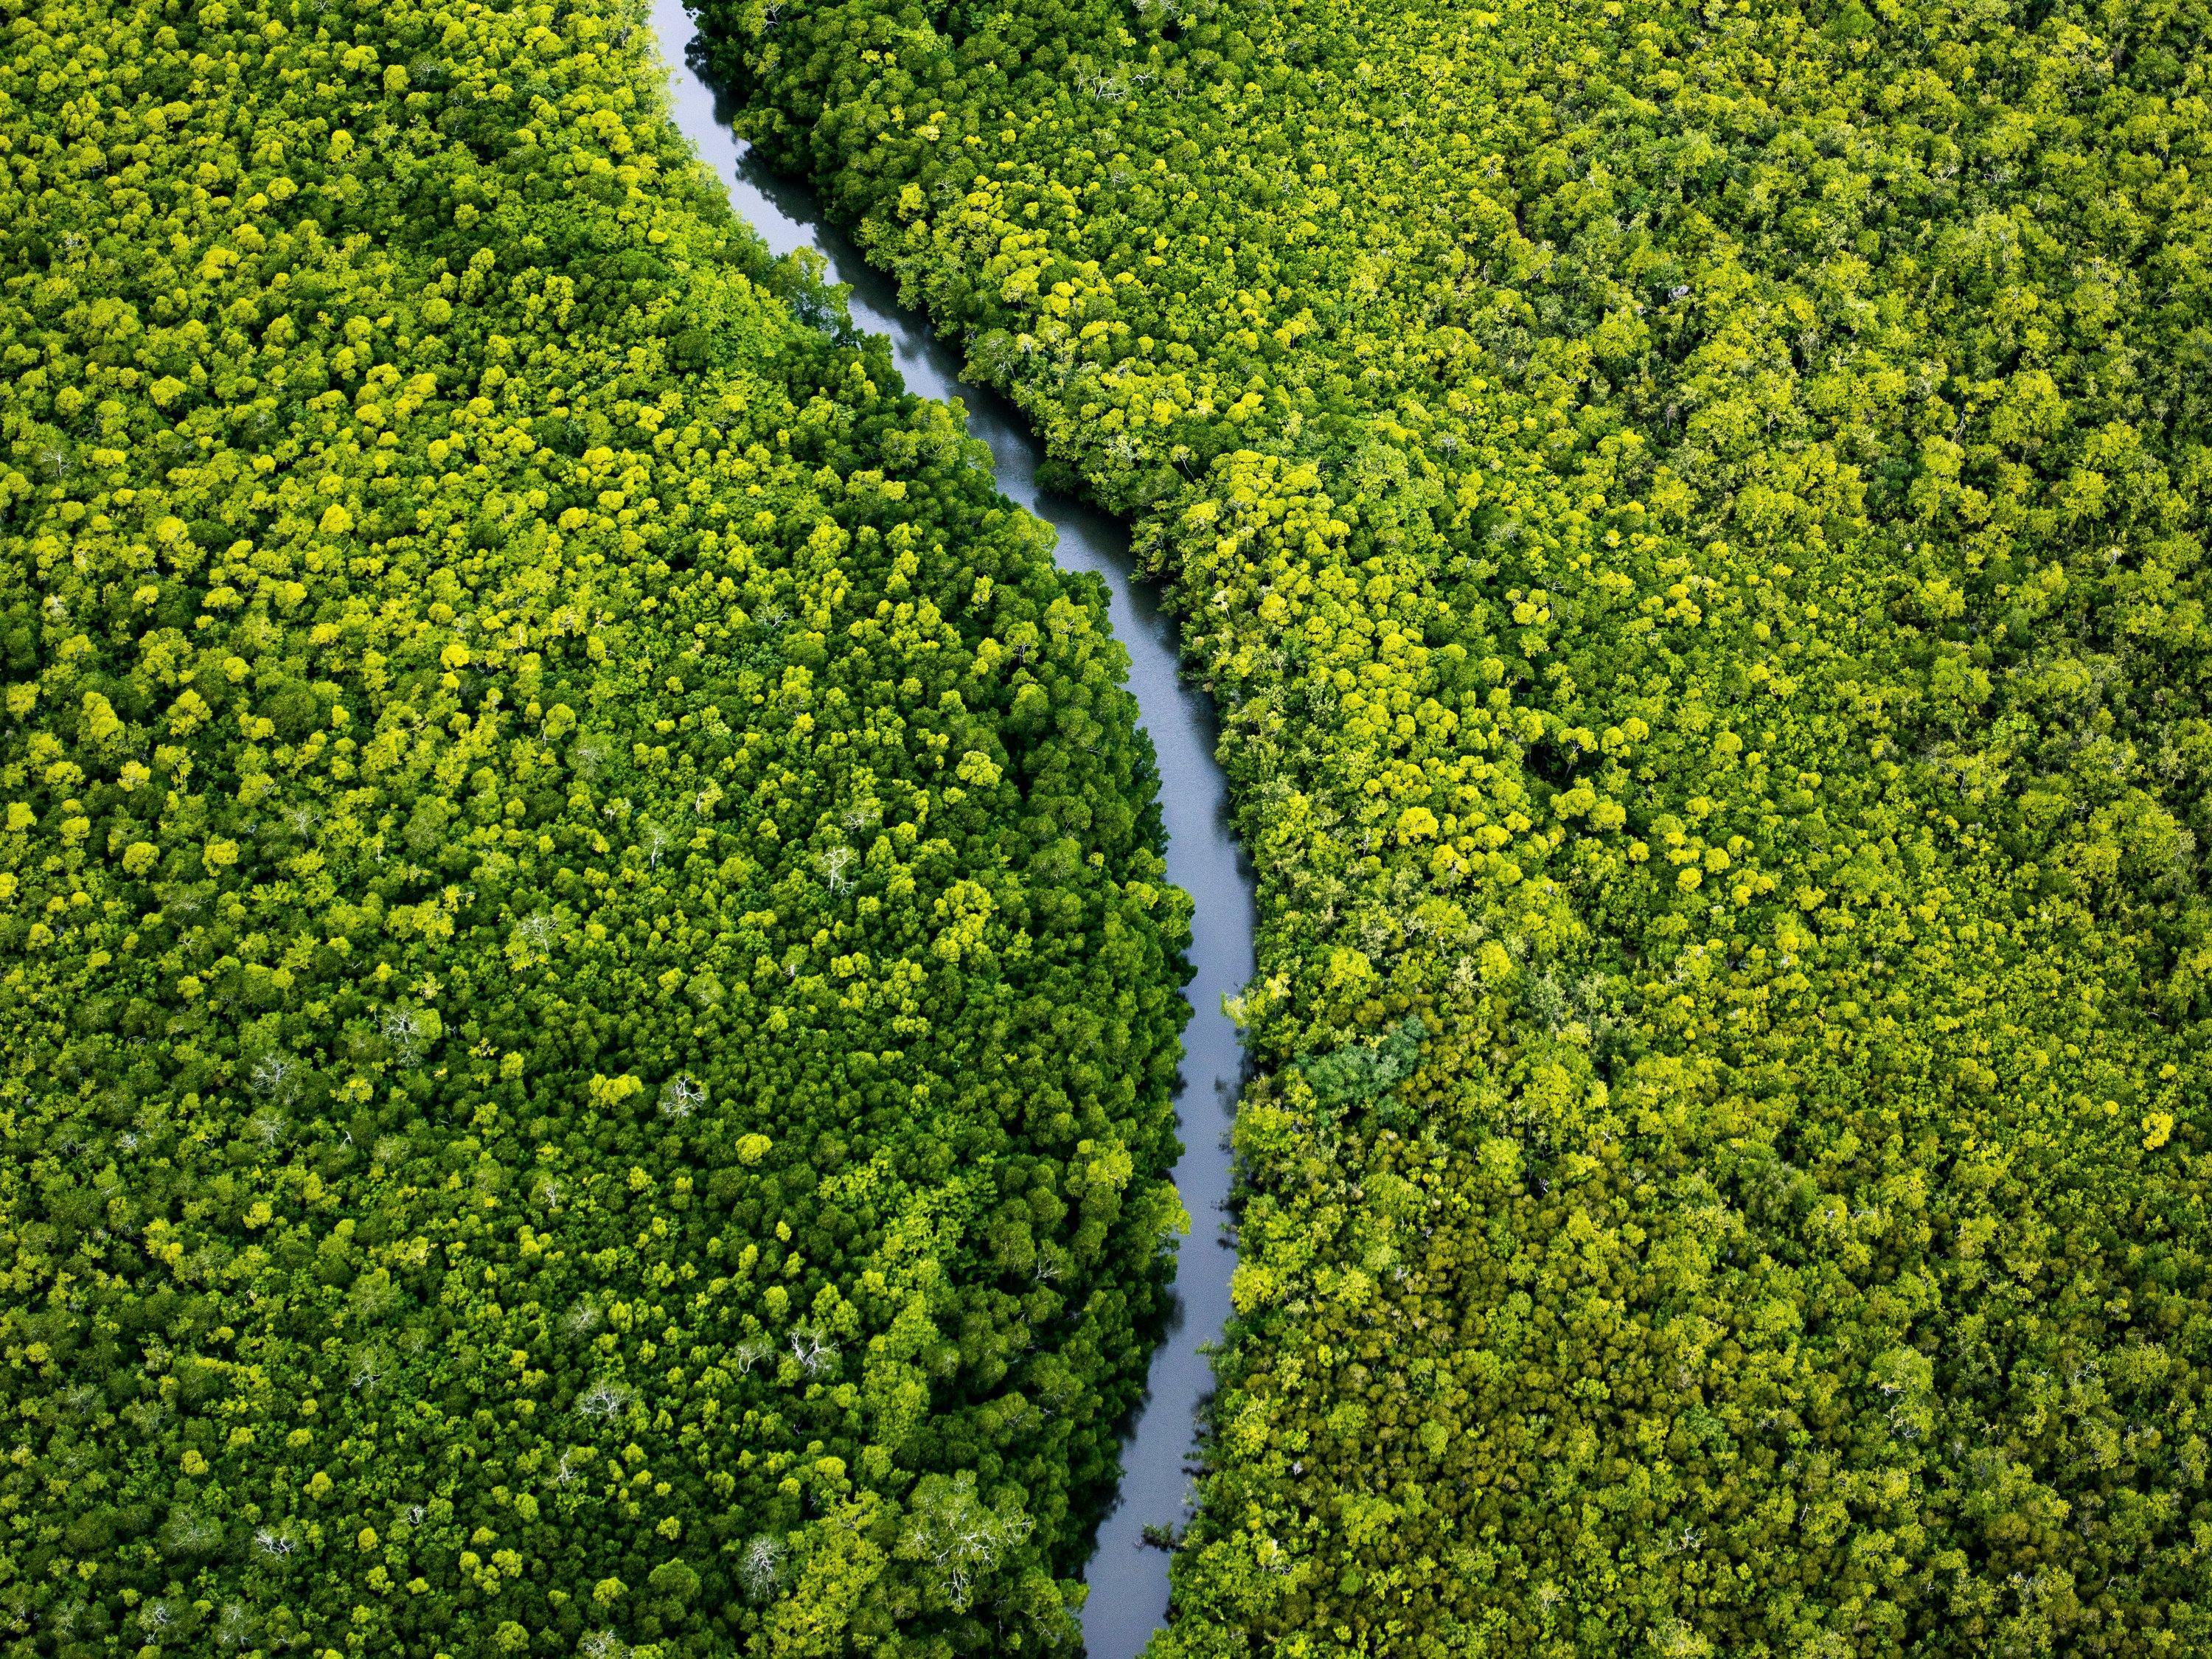 Thick dense green fields with a singular curvy line of water crossing the entire area, Hidden Journey